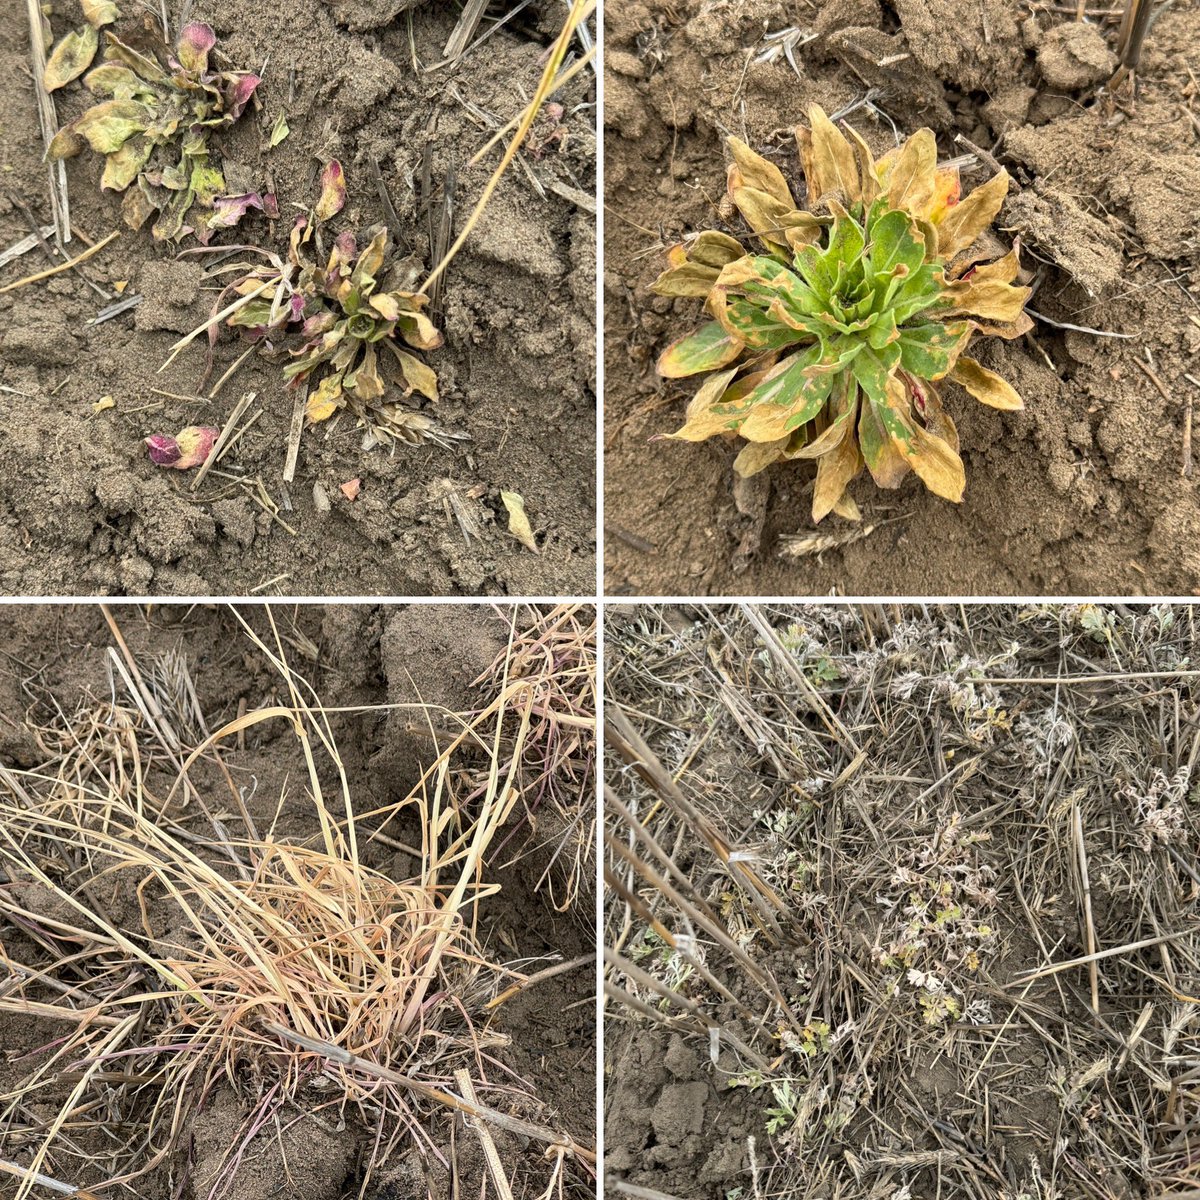 Thanks for the photos Ryan Selzer. Insight cookin’ up some weeds 7DAA. You are now entered in the cooler contest. #InsightFastestBurn @TeamSASKGOWAN